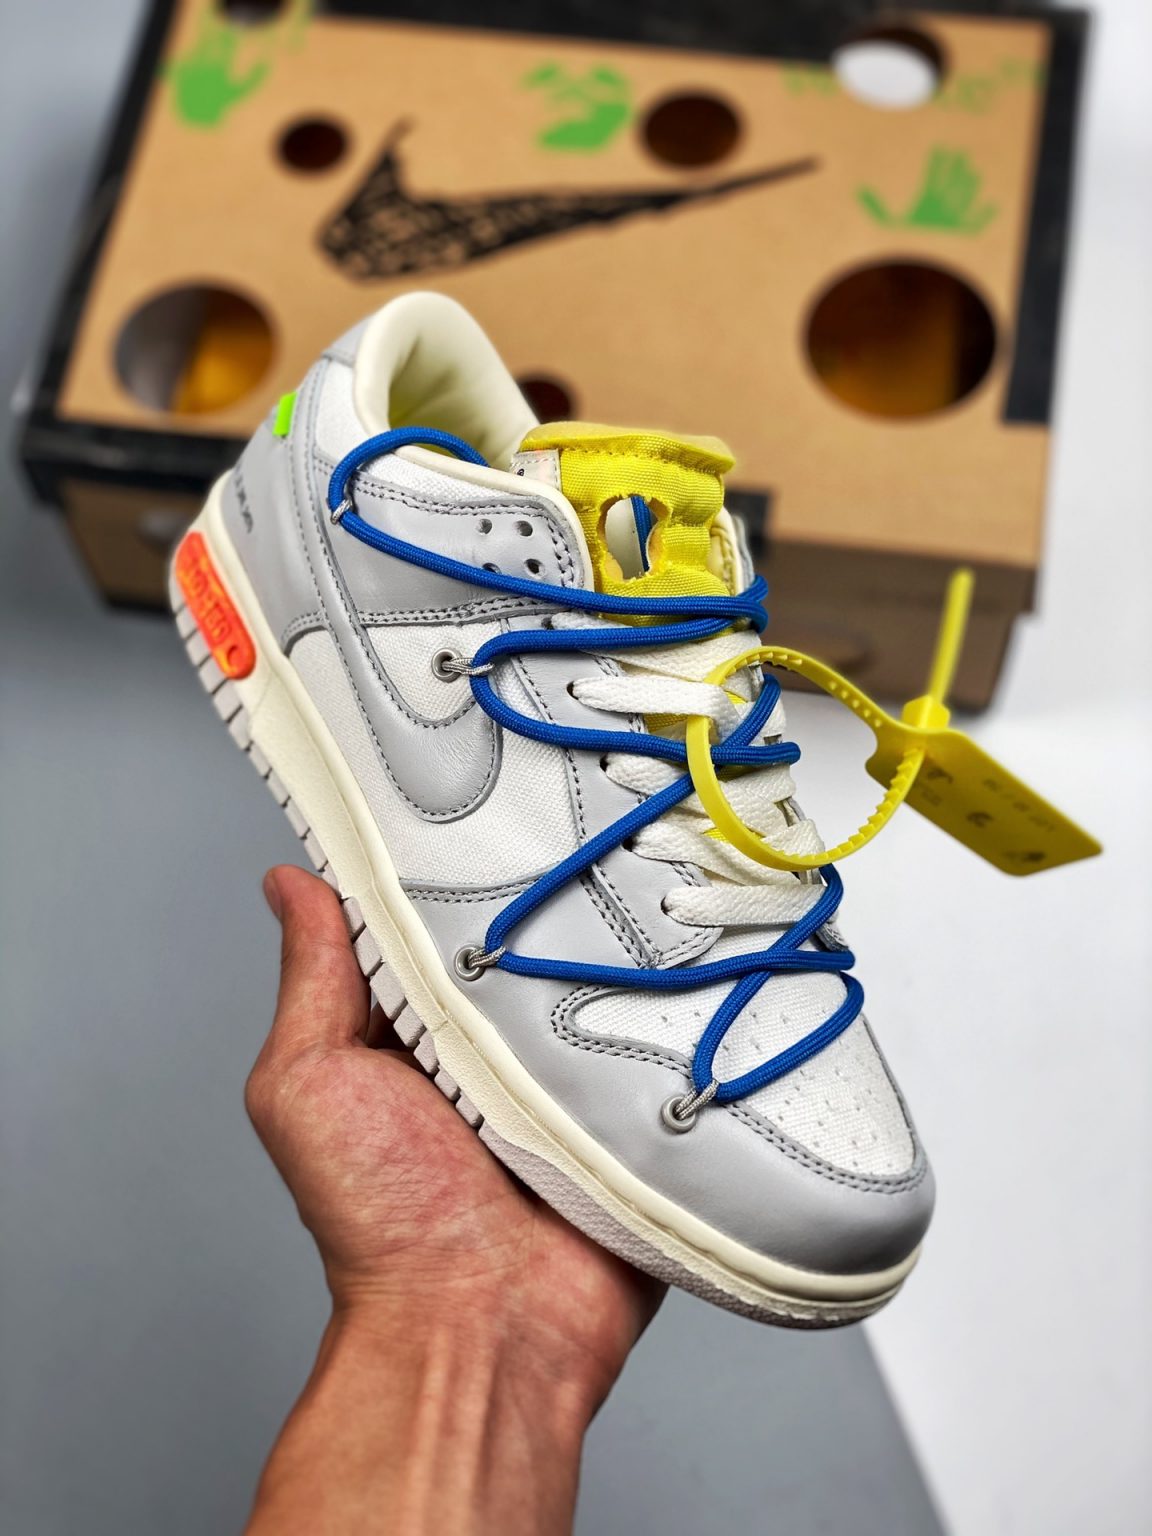 Off-White x Nike Dunk Low the 50. Nike Dunk Low off White 50. Nike Dunk Low off White. Nike SB Dunk off White. Шнуровка dunk